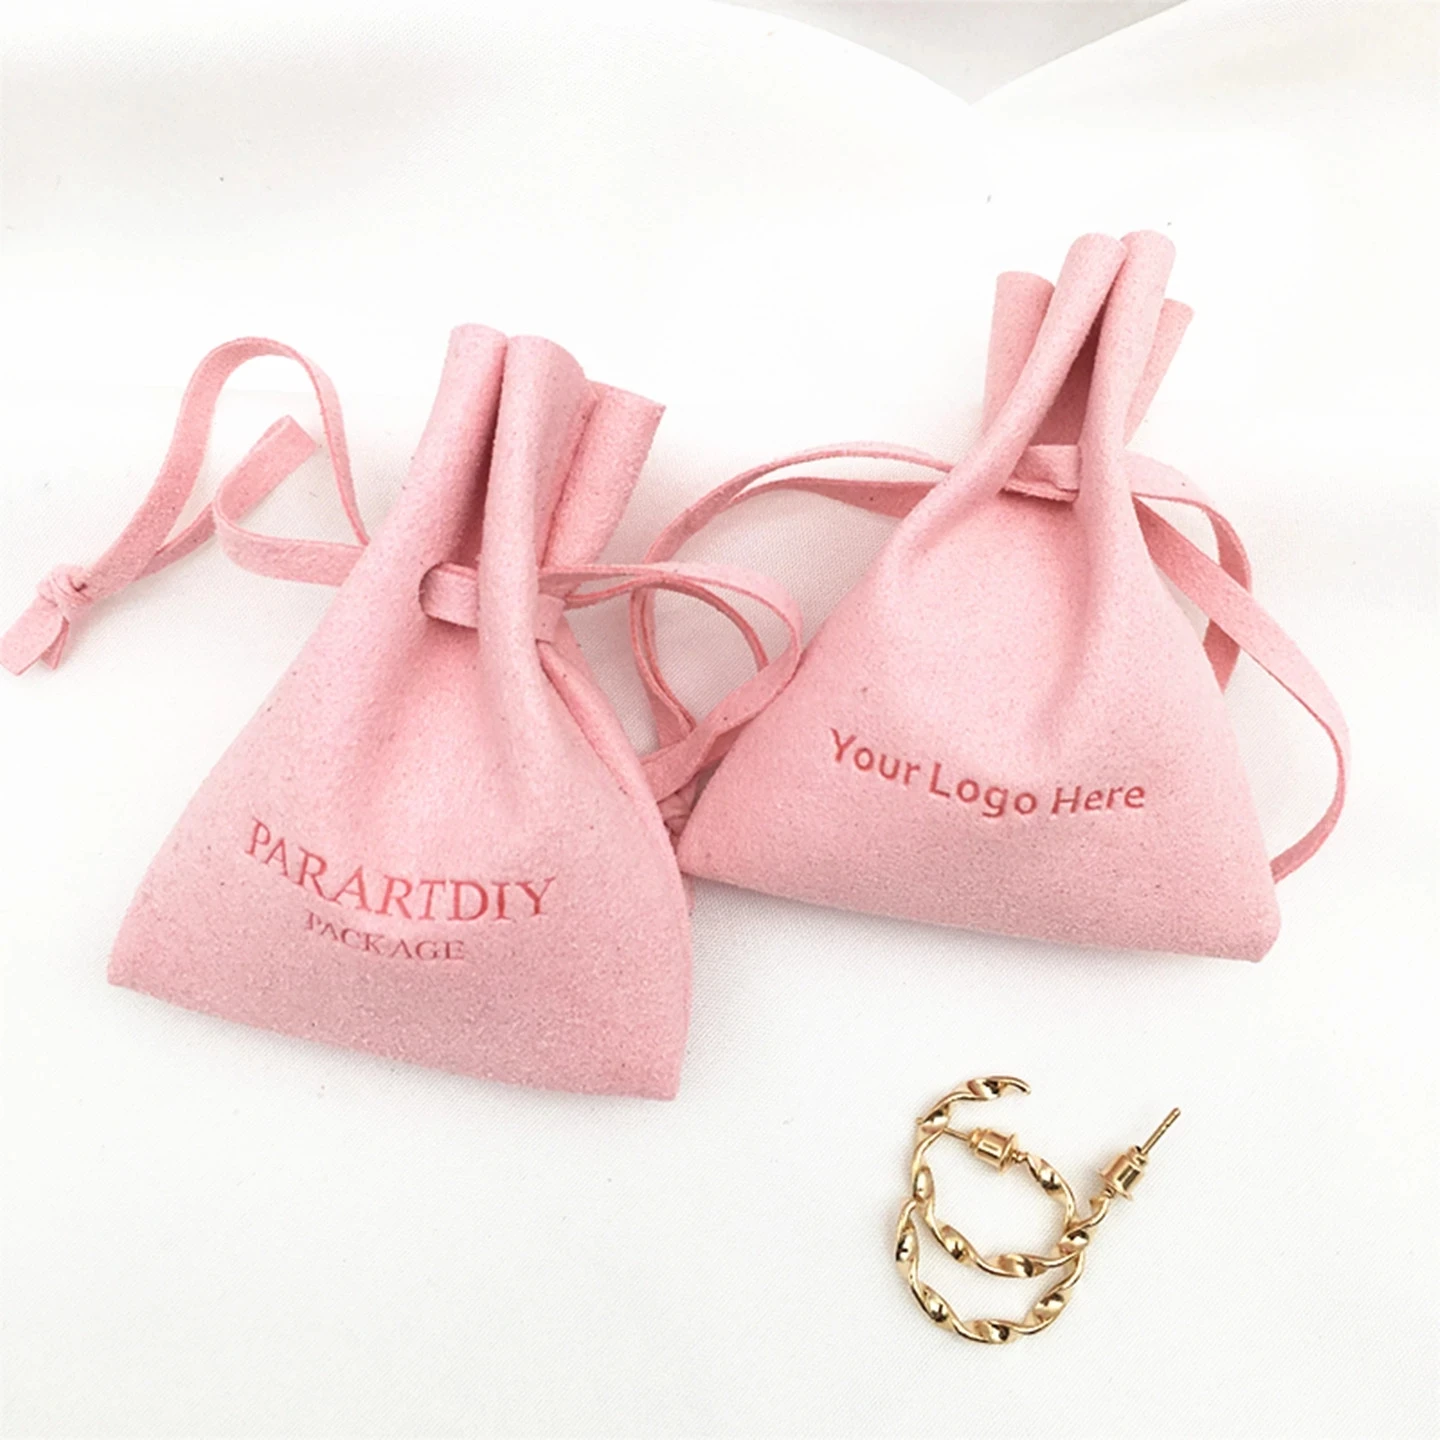 50pcs Custom Jewelry Pouch with Logo,Personalized Jewerly Bag with Logo,Custom Jewelry Pouch,Earring Bag,Necklace Pouch,Pink